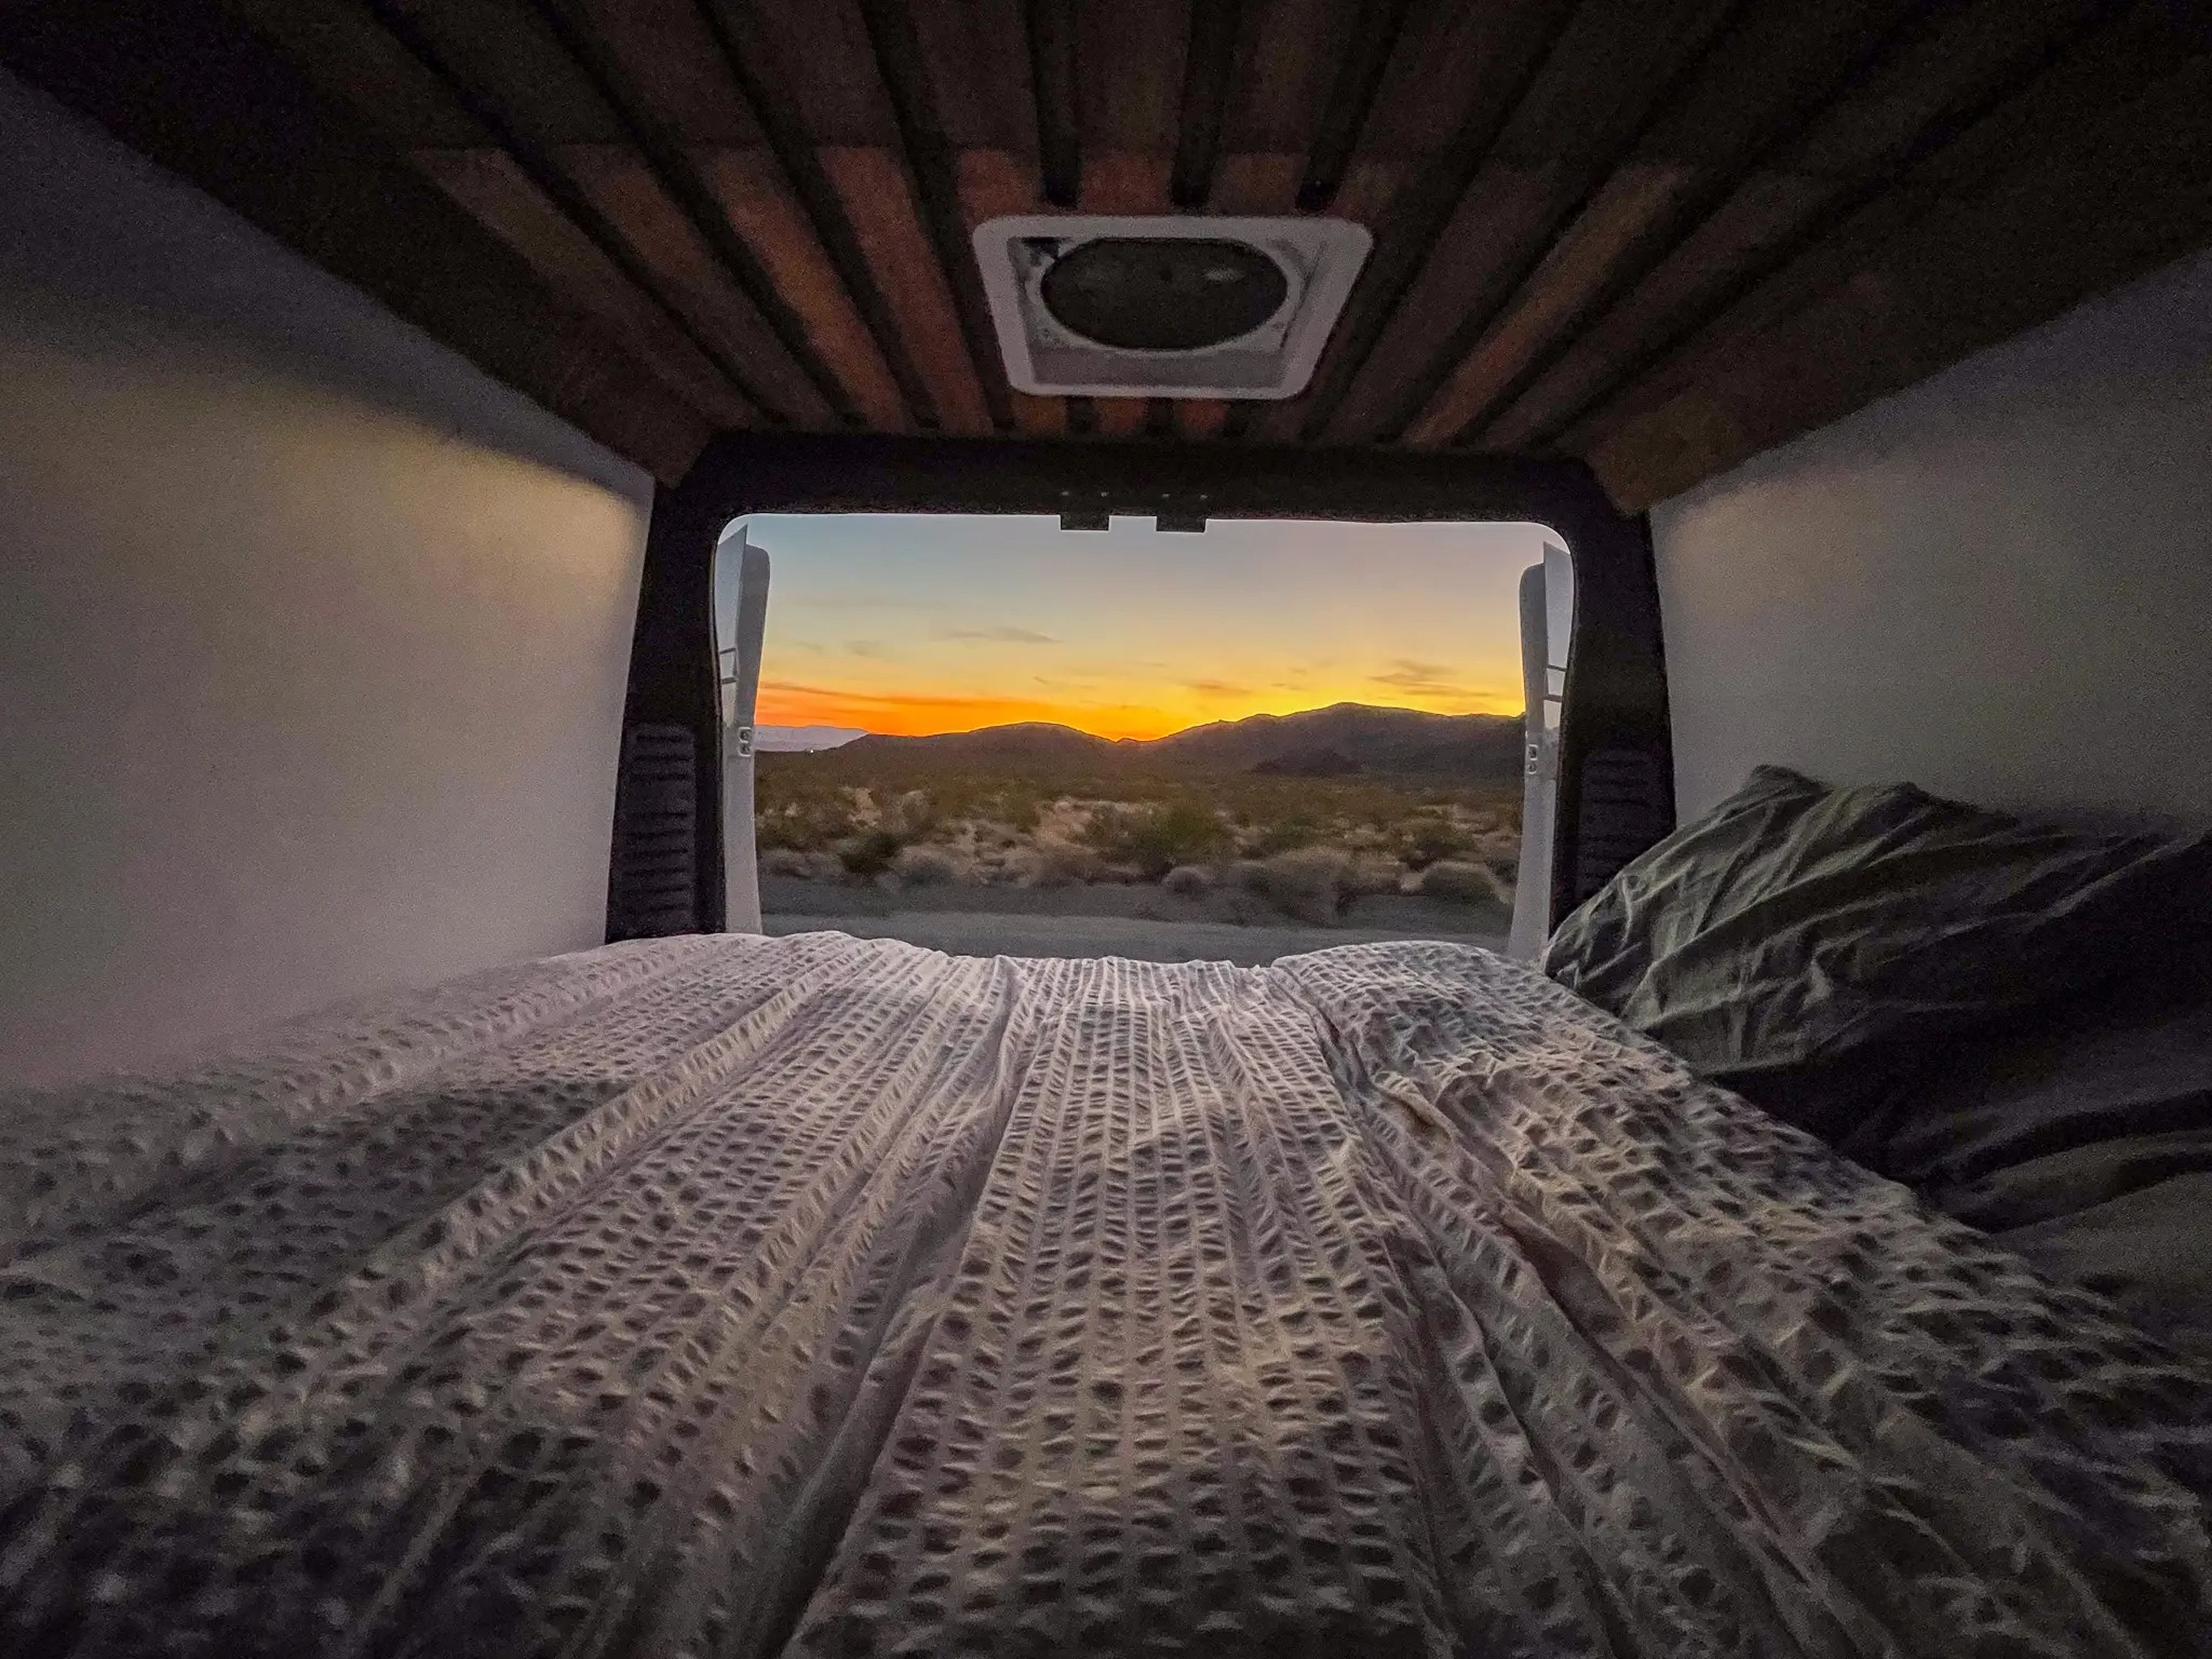 A view of a sunset in the author's van.